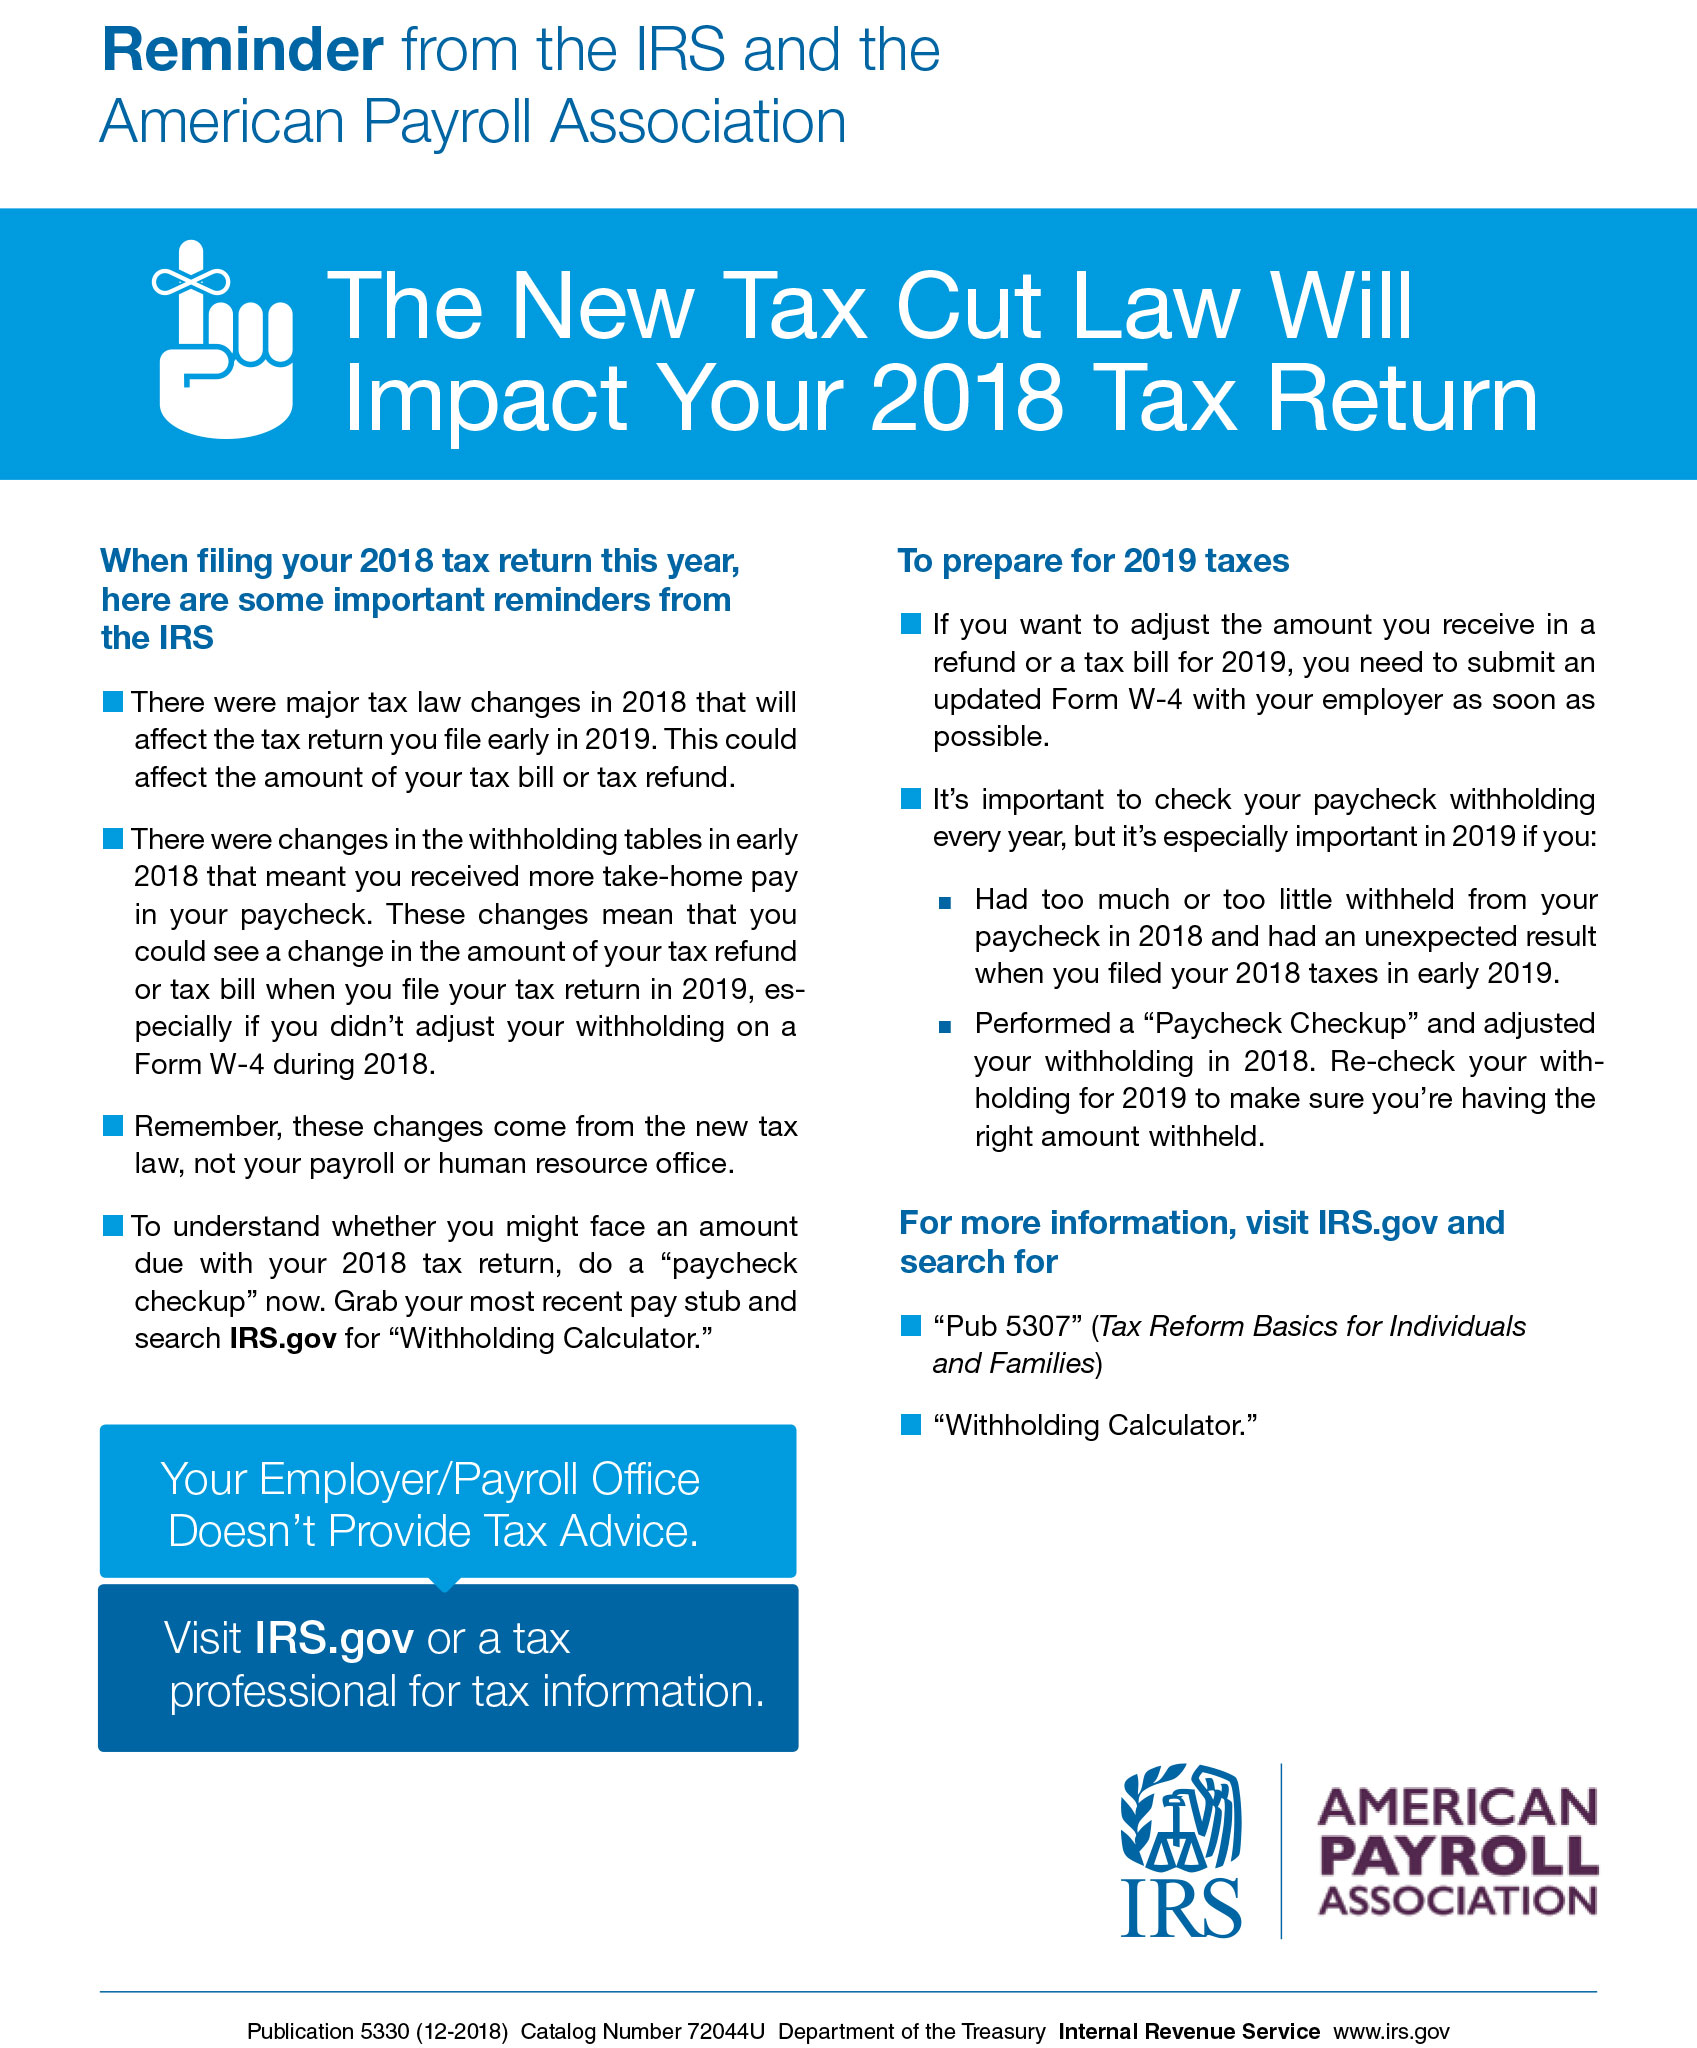 Reminder from the IRS and American Payroll Association